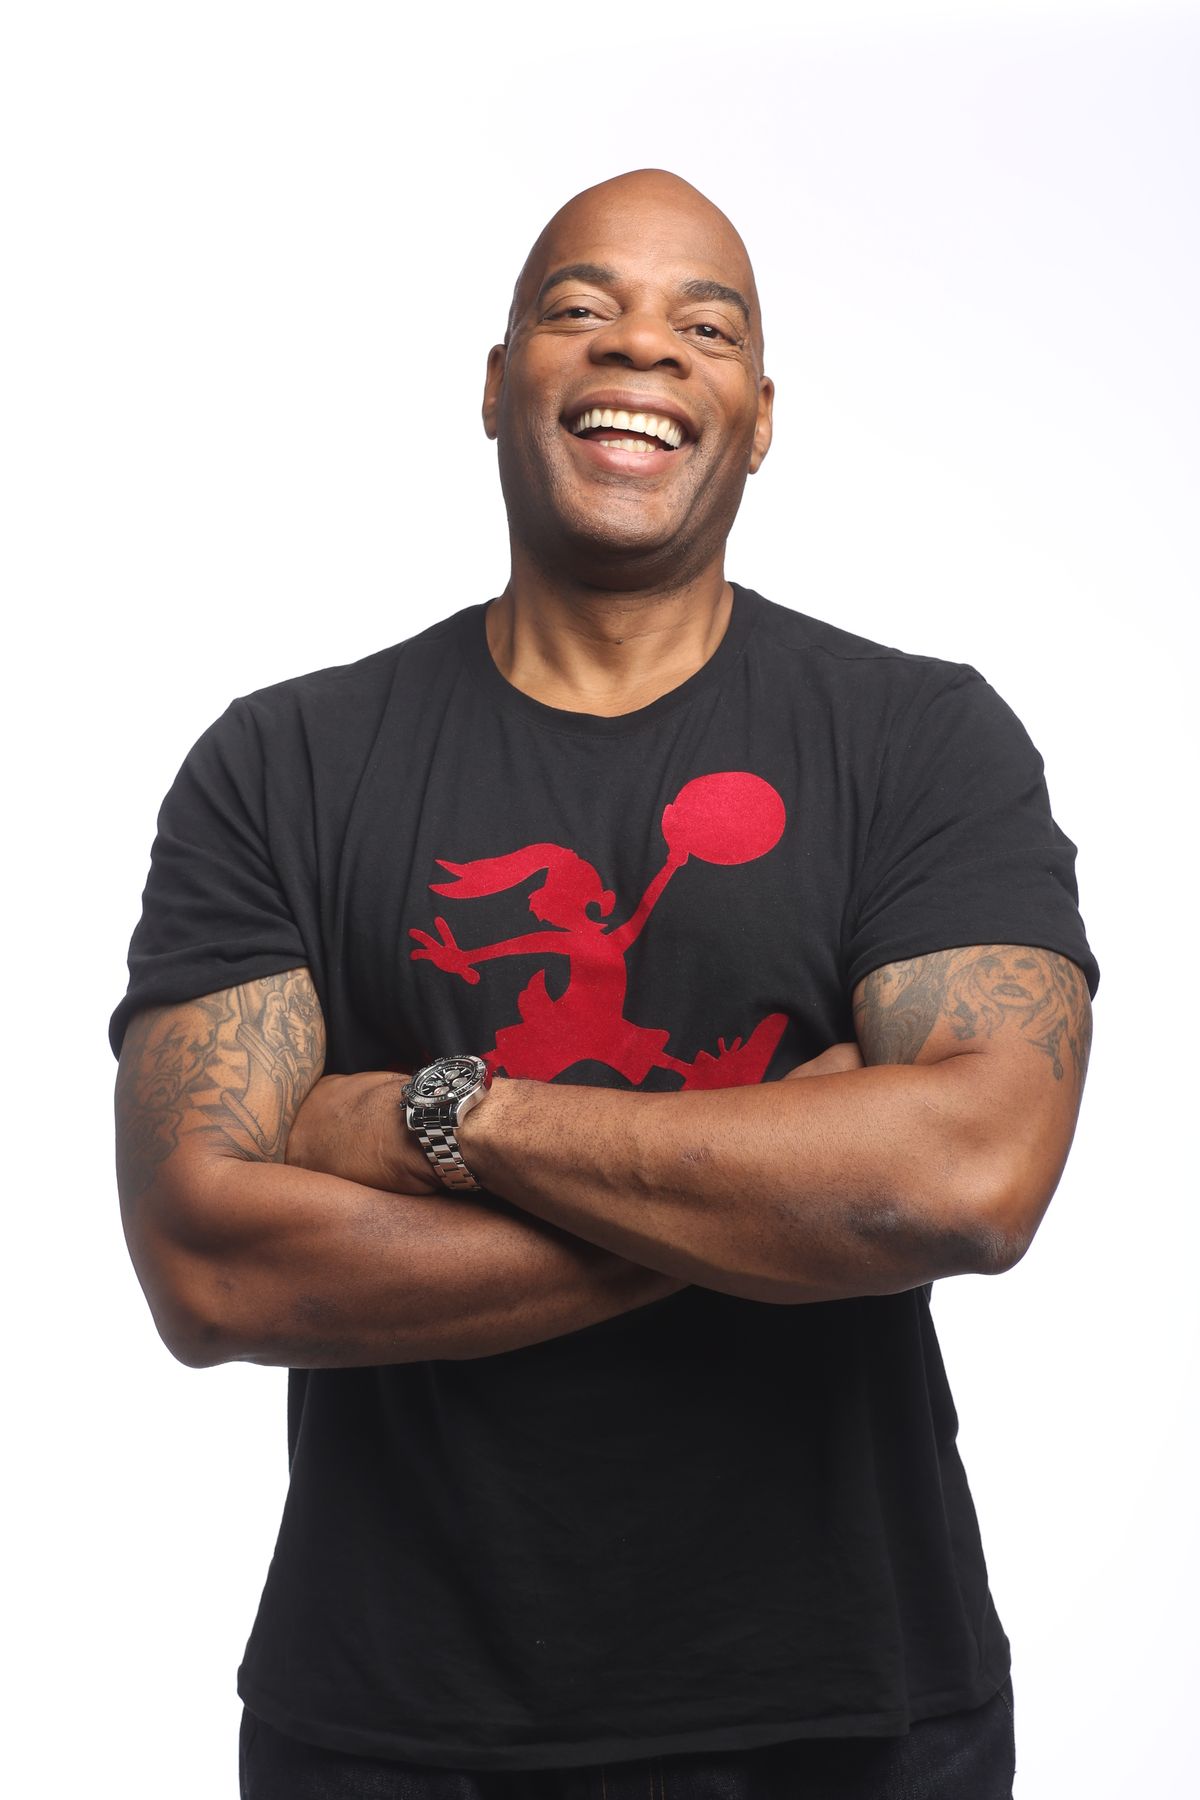 Alonzo Bodden has two shows at the Spokane Comedy Club on Friday night. (Todd Rosenberg Photography)